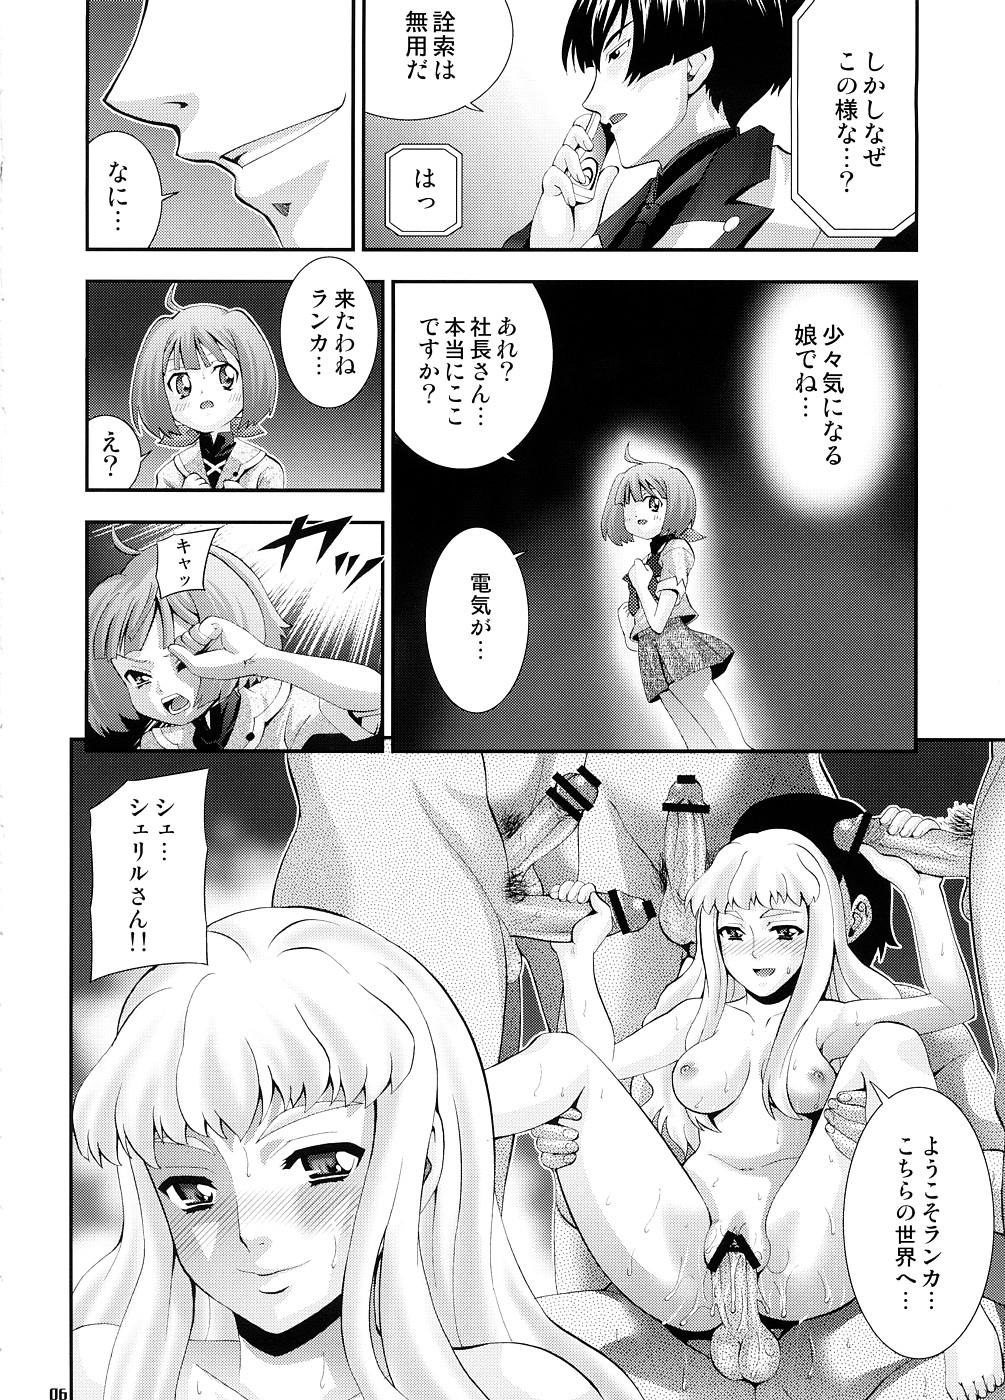 Ejaculation Song Bird - Macross frontier Tinytits - Page 5